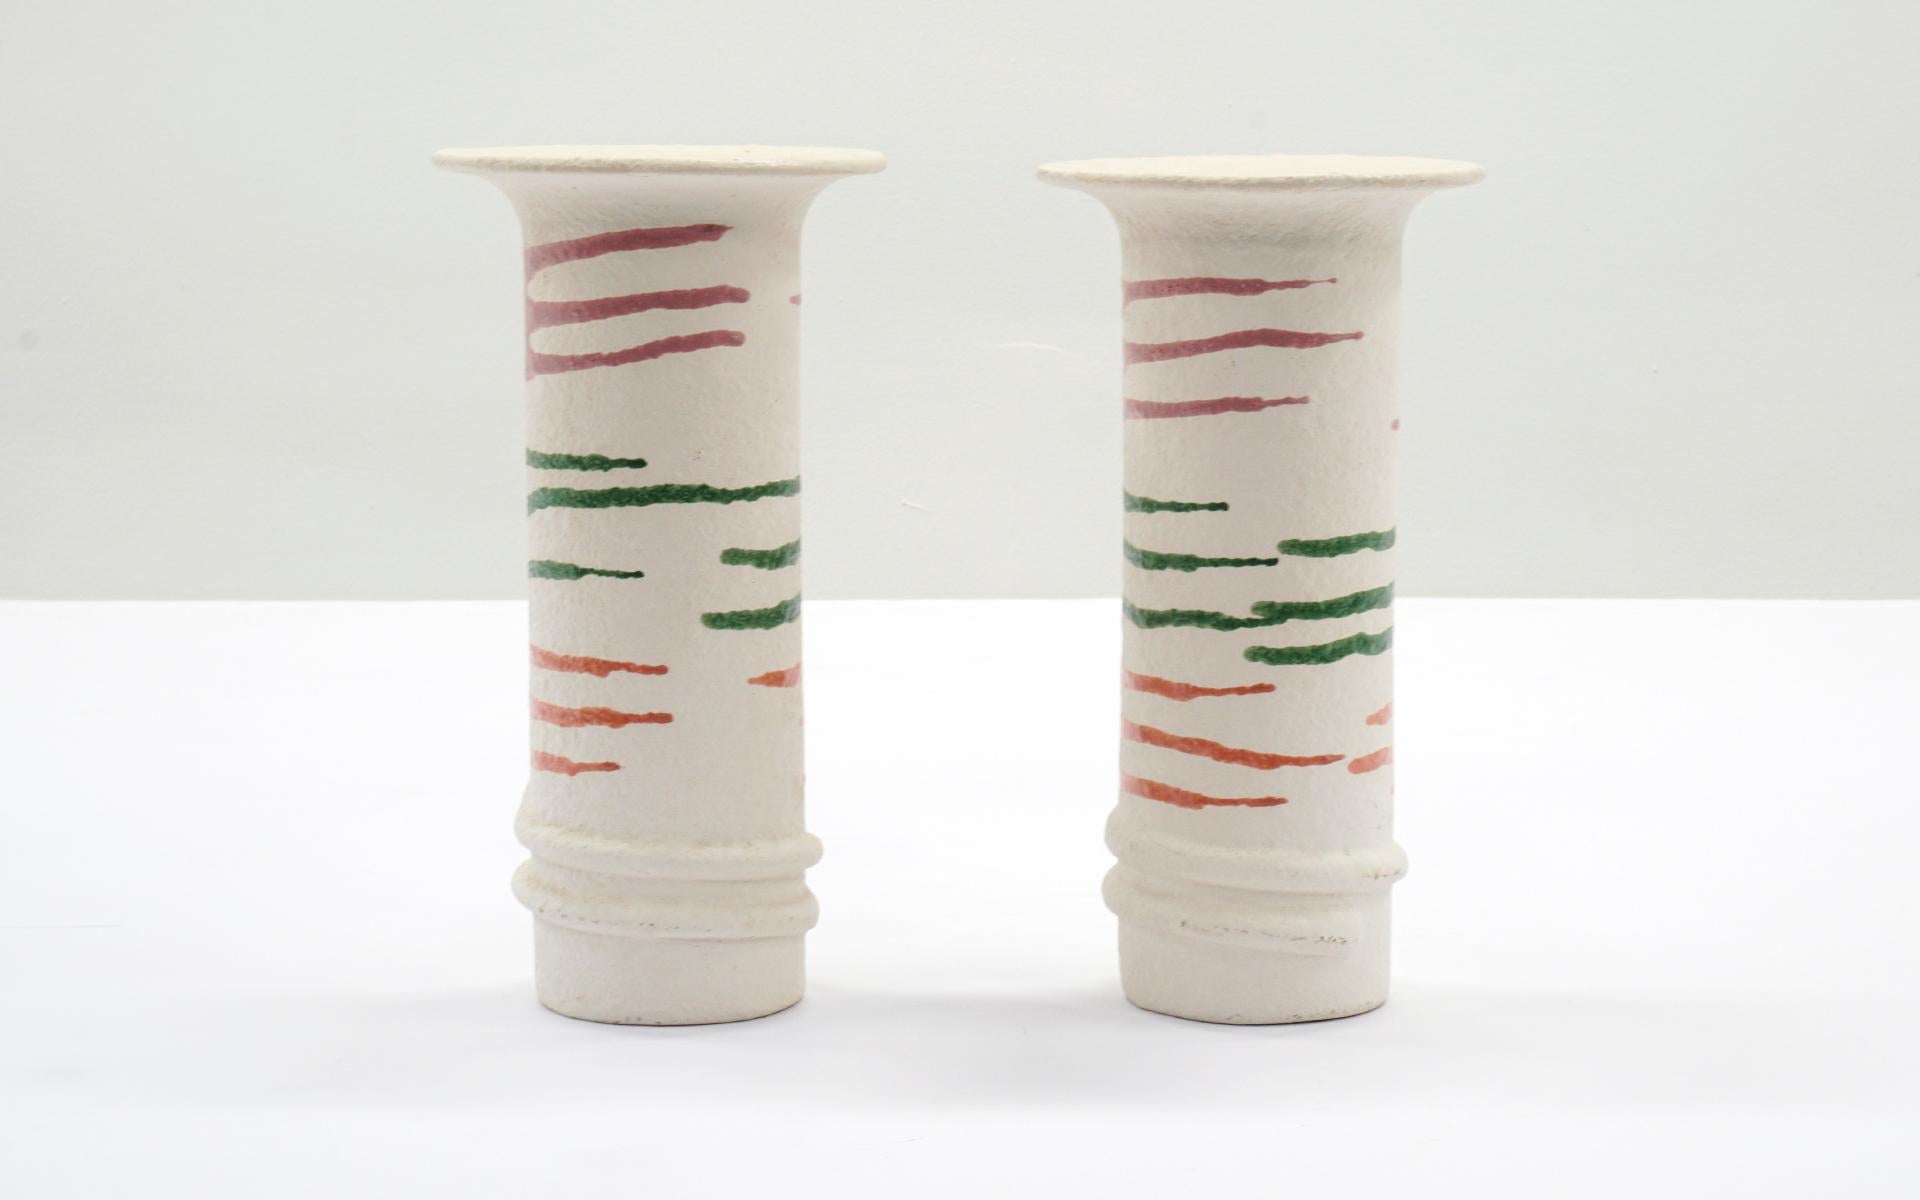 American Pair of Ceramic Vases, Textured White with Orange, Green and Red, 1980s